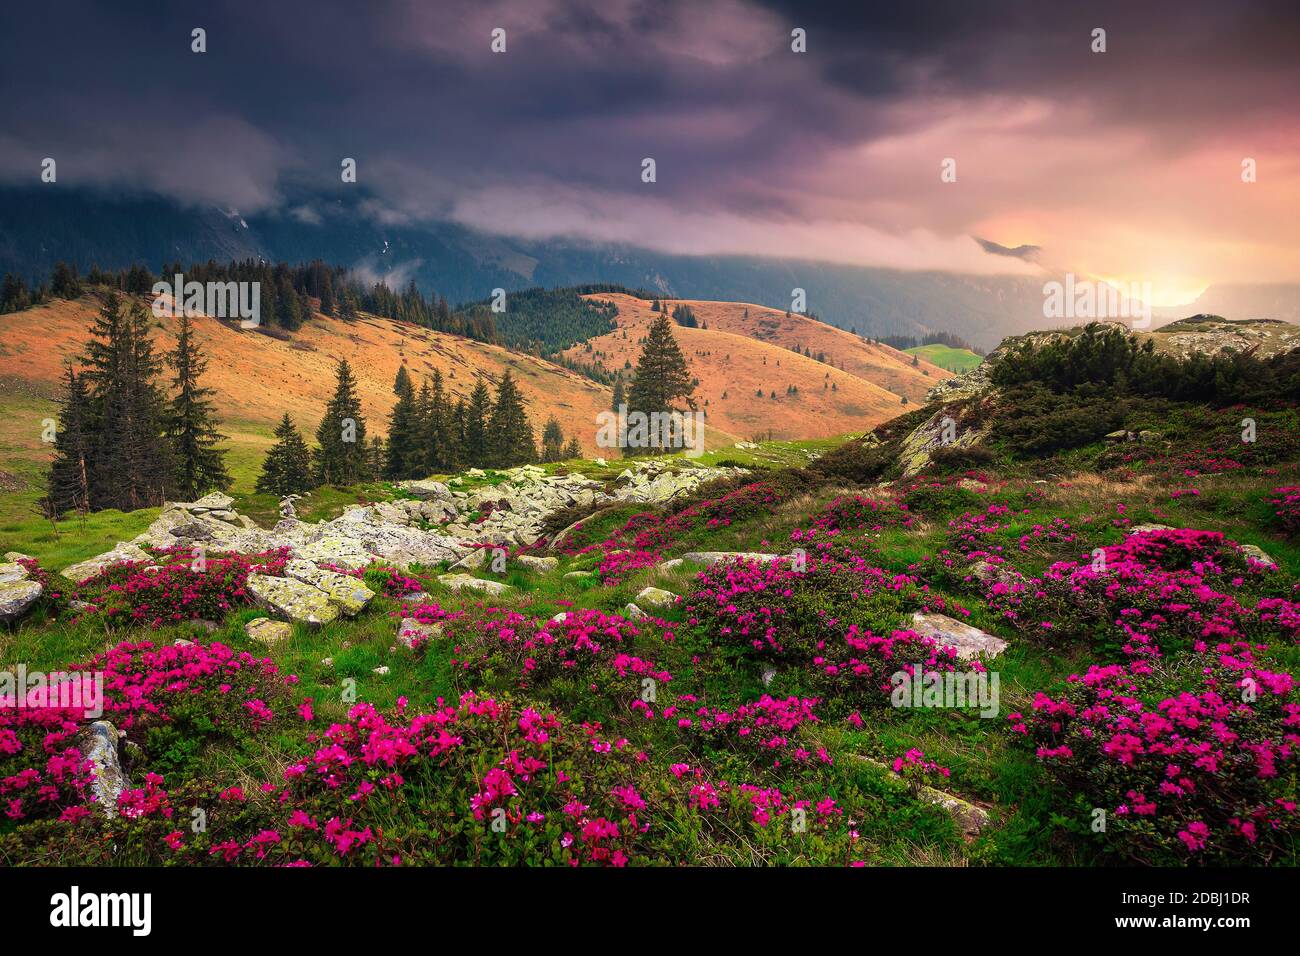 Beautiful hills with flowery slopes at sunrise. Admirable pink rhododendron flowers in mountains on misty morning at sunrise, Carpathians, Transylvani Stock Photo